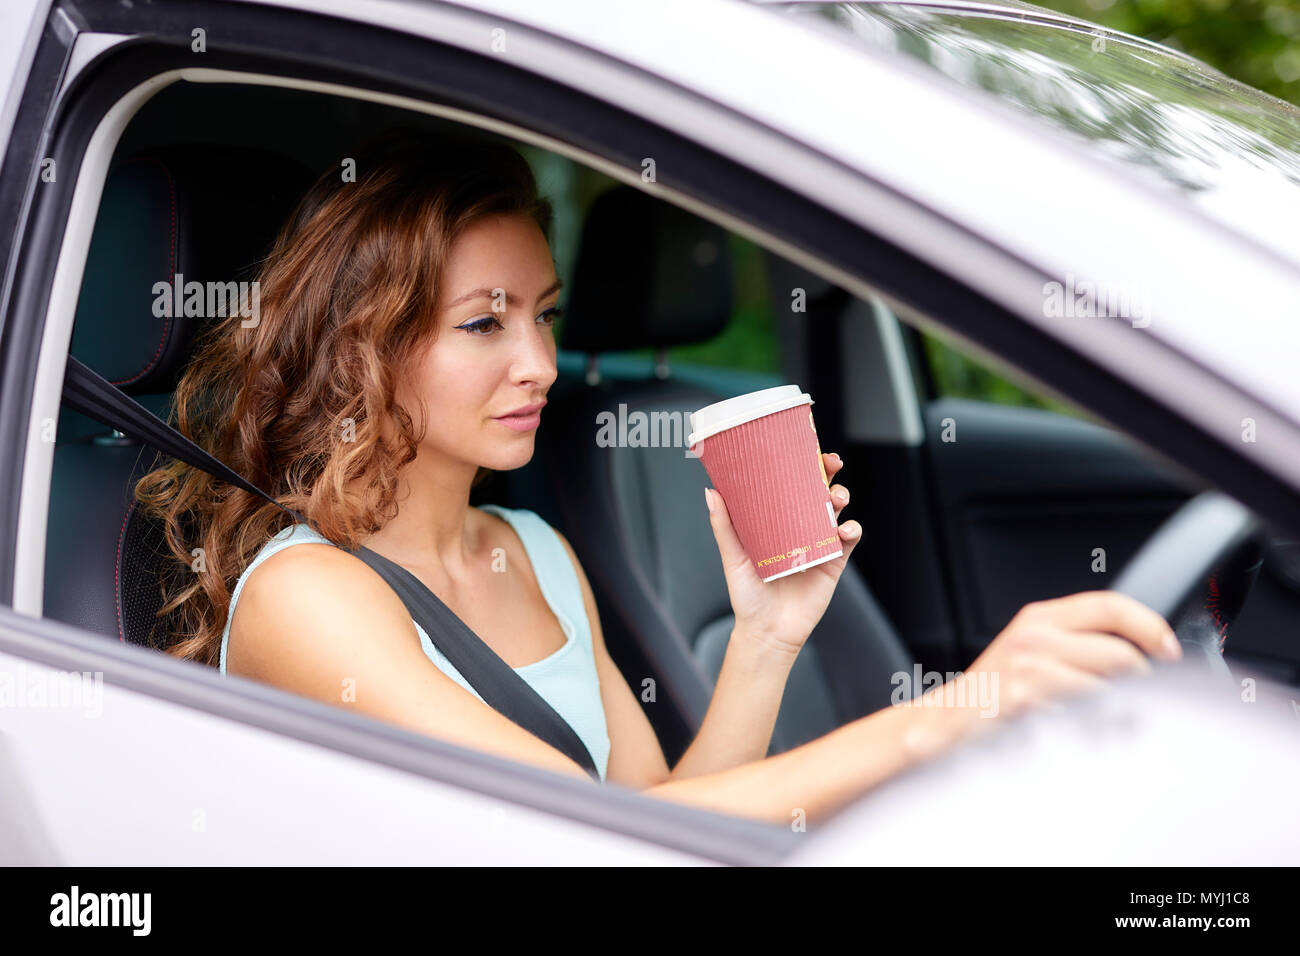 Woman drinking coffee whilst driving Stock Photo